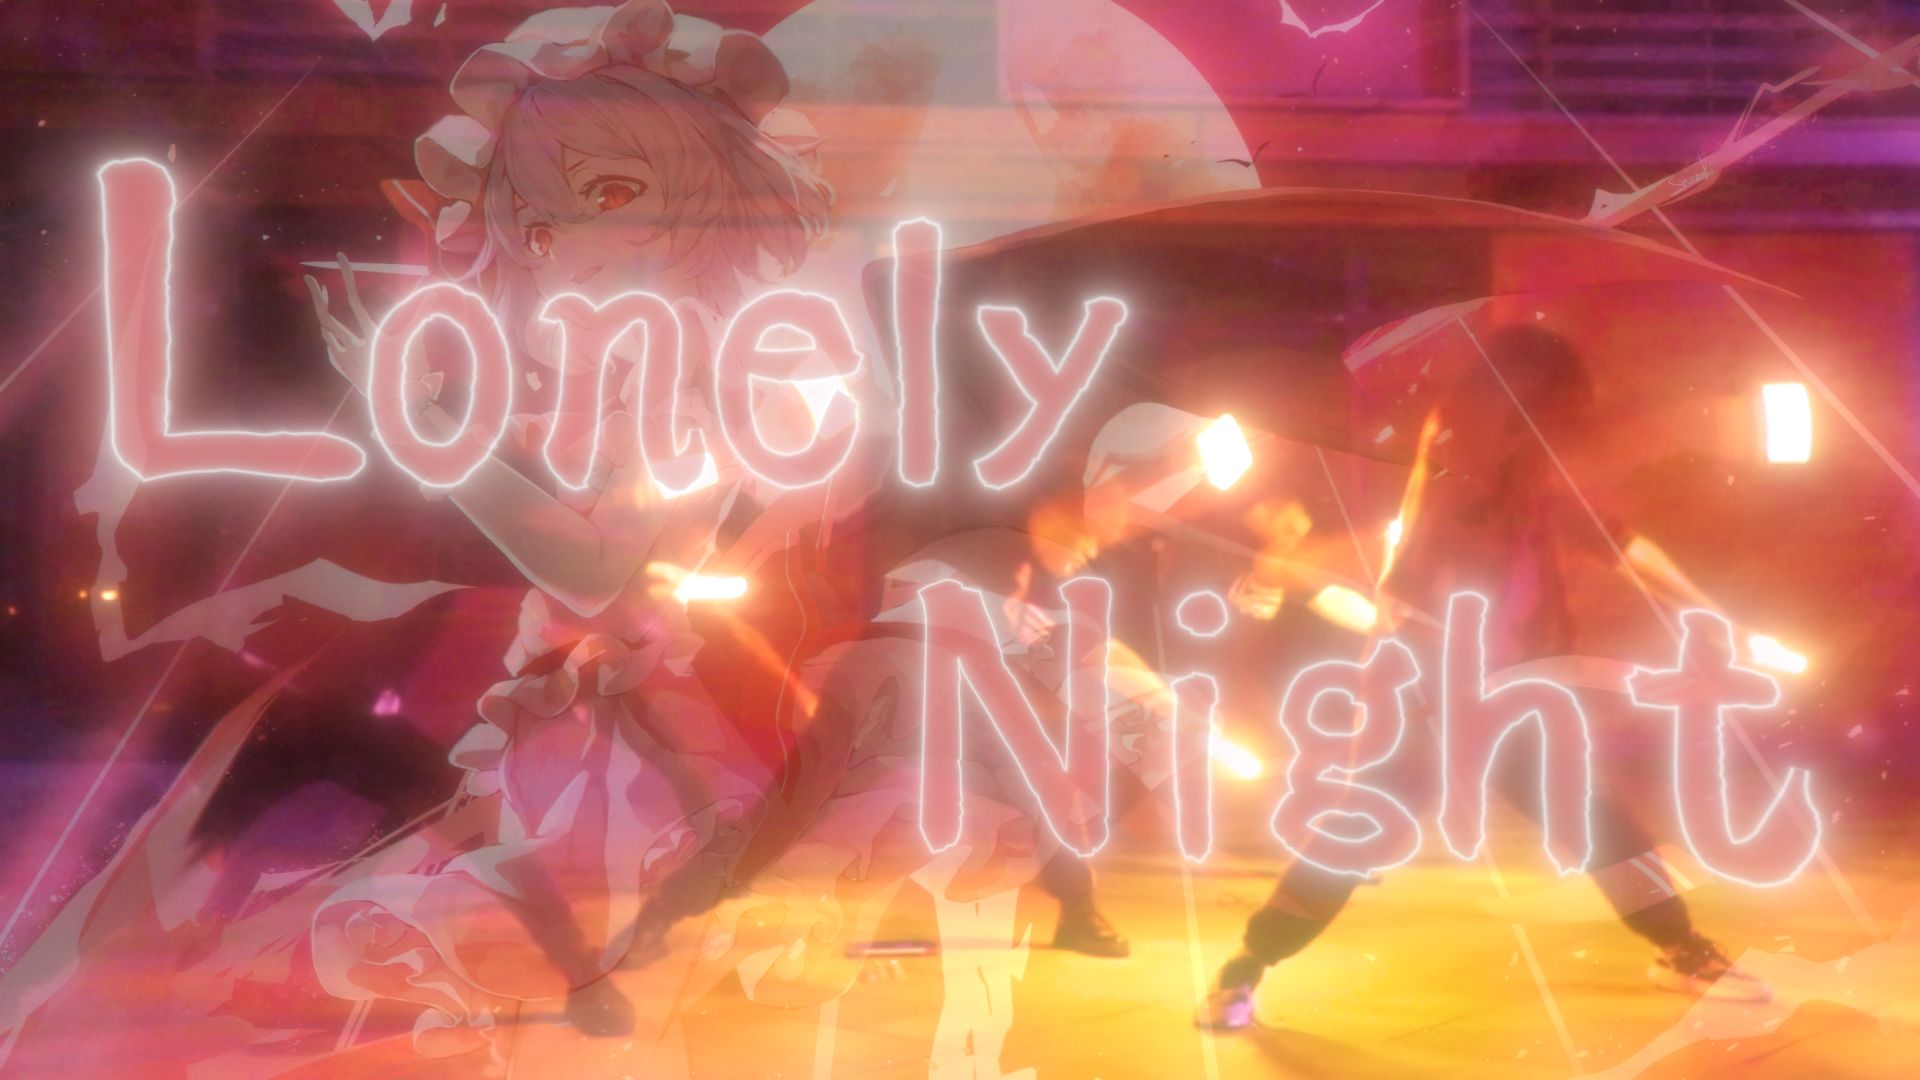 【WOTA艺】LONELY NIGHT【HB to Kumaien】